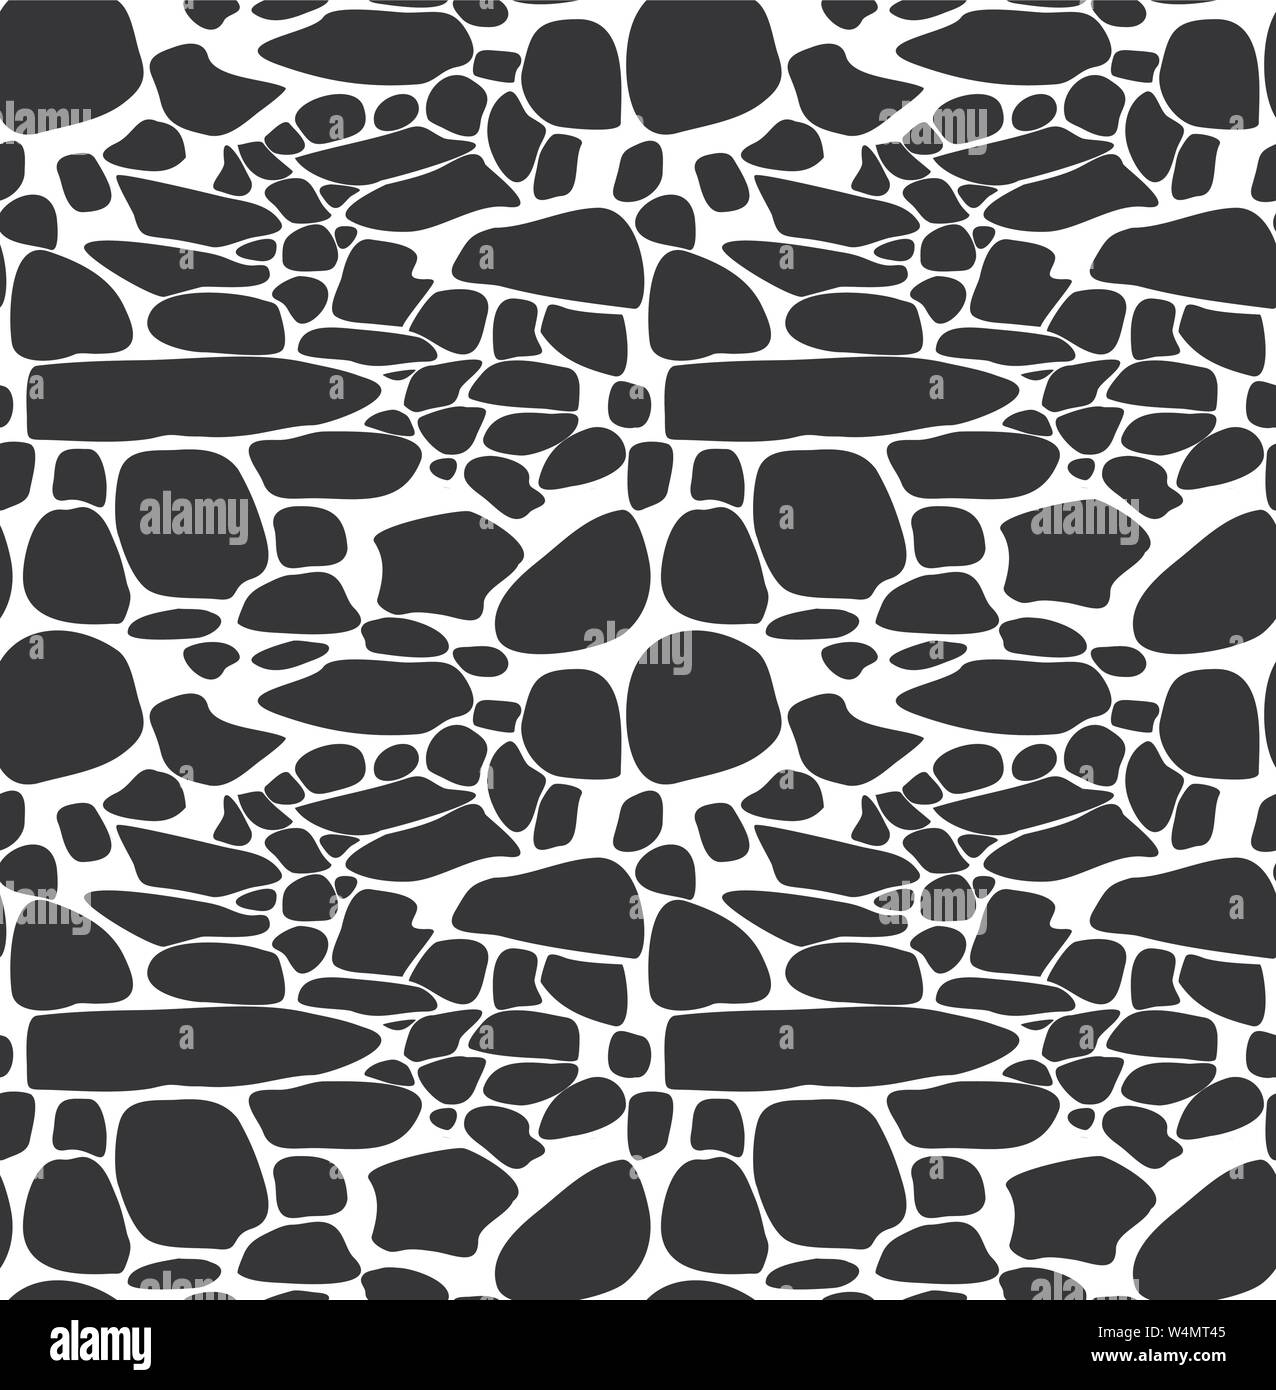 stone texture silhouette black seamless background wallpaper. Stock Vector